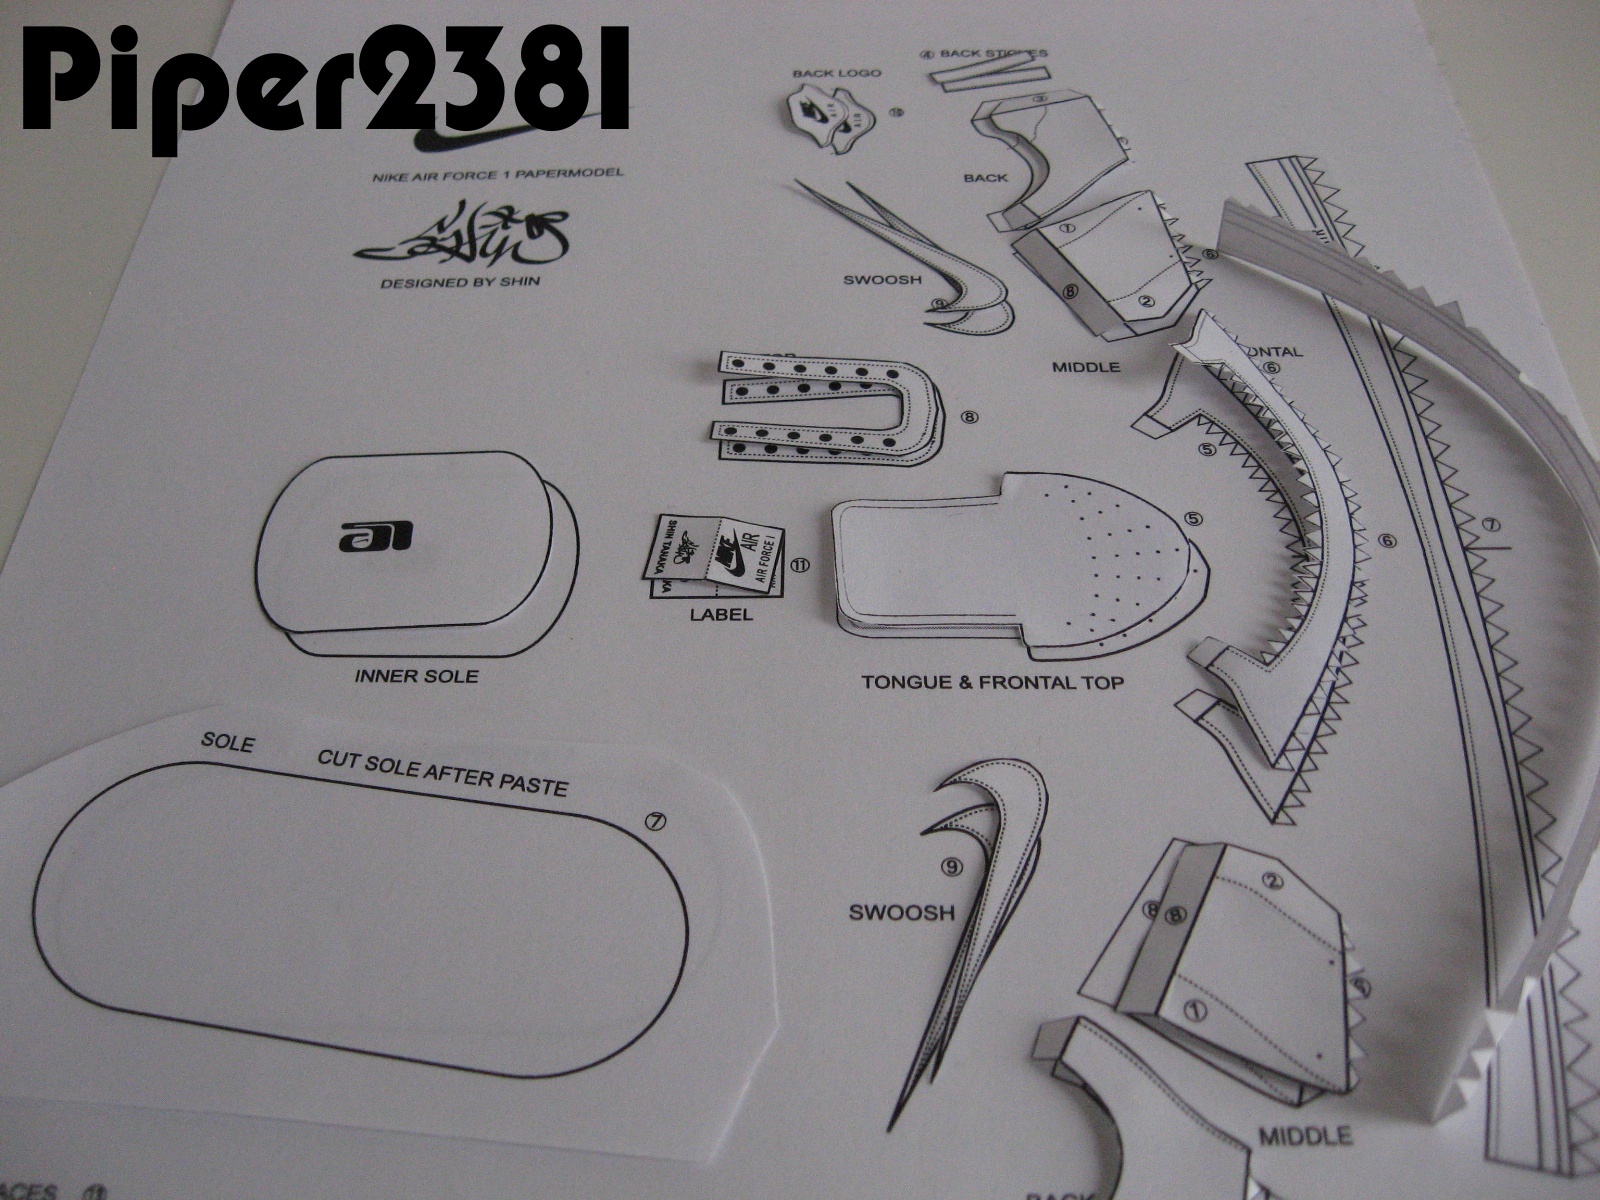 piper2381-nike-air-force-1-papercraft